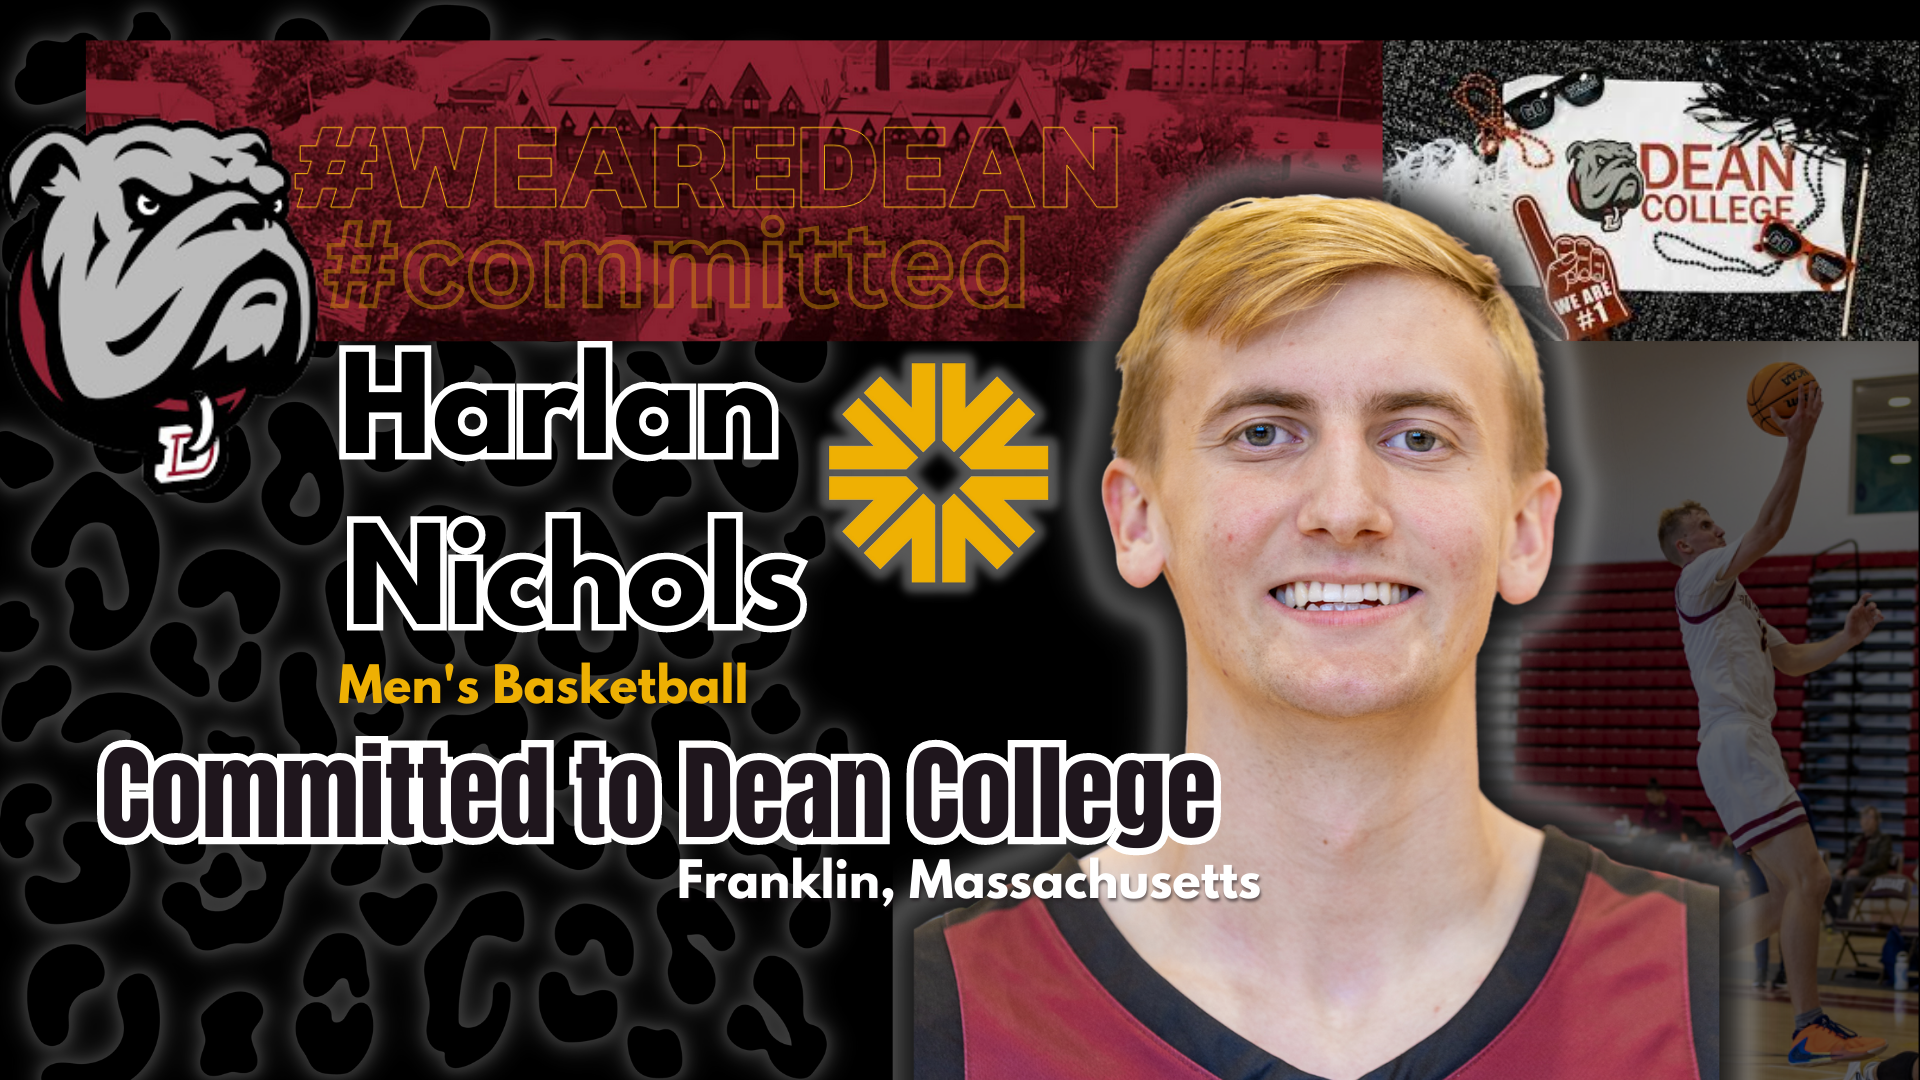 Southwestern College congratulates Harlan Nichols after committing to Dean College